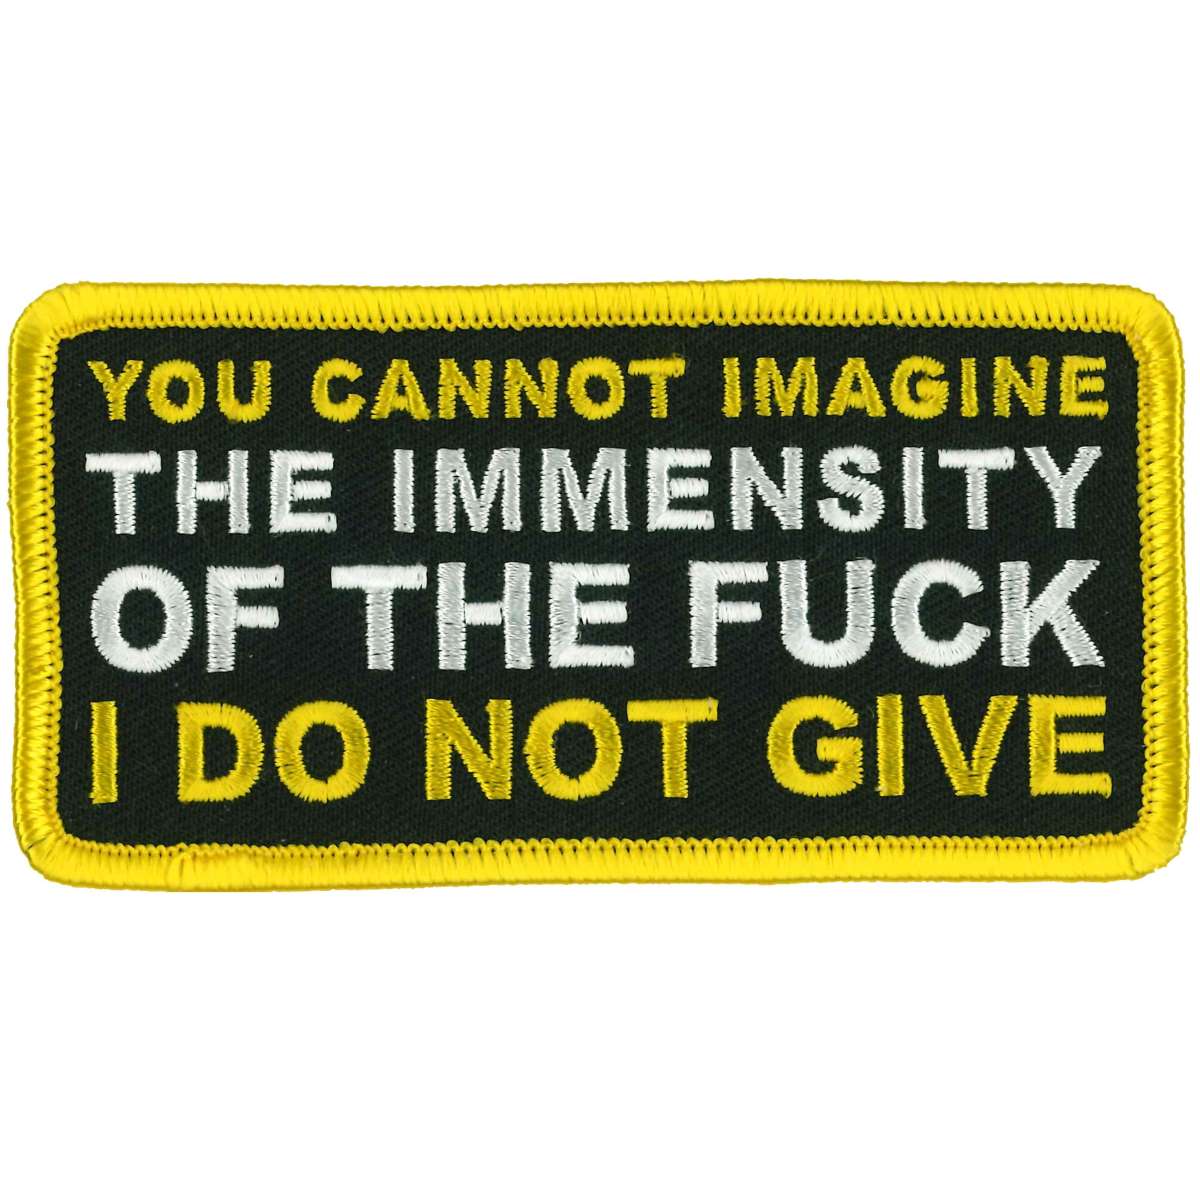 Hot Leathers You Cannot Imagine 4" X 2" Patch PPL9990